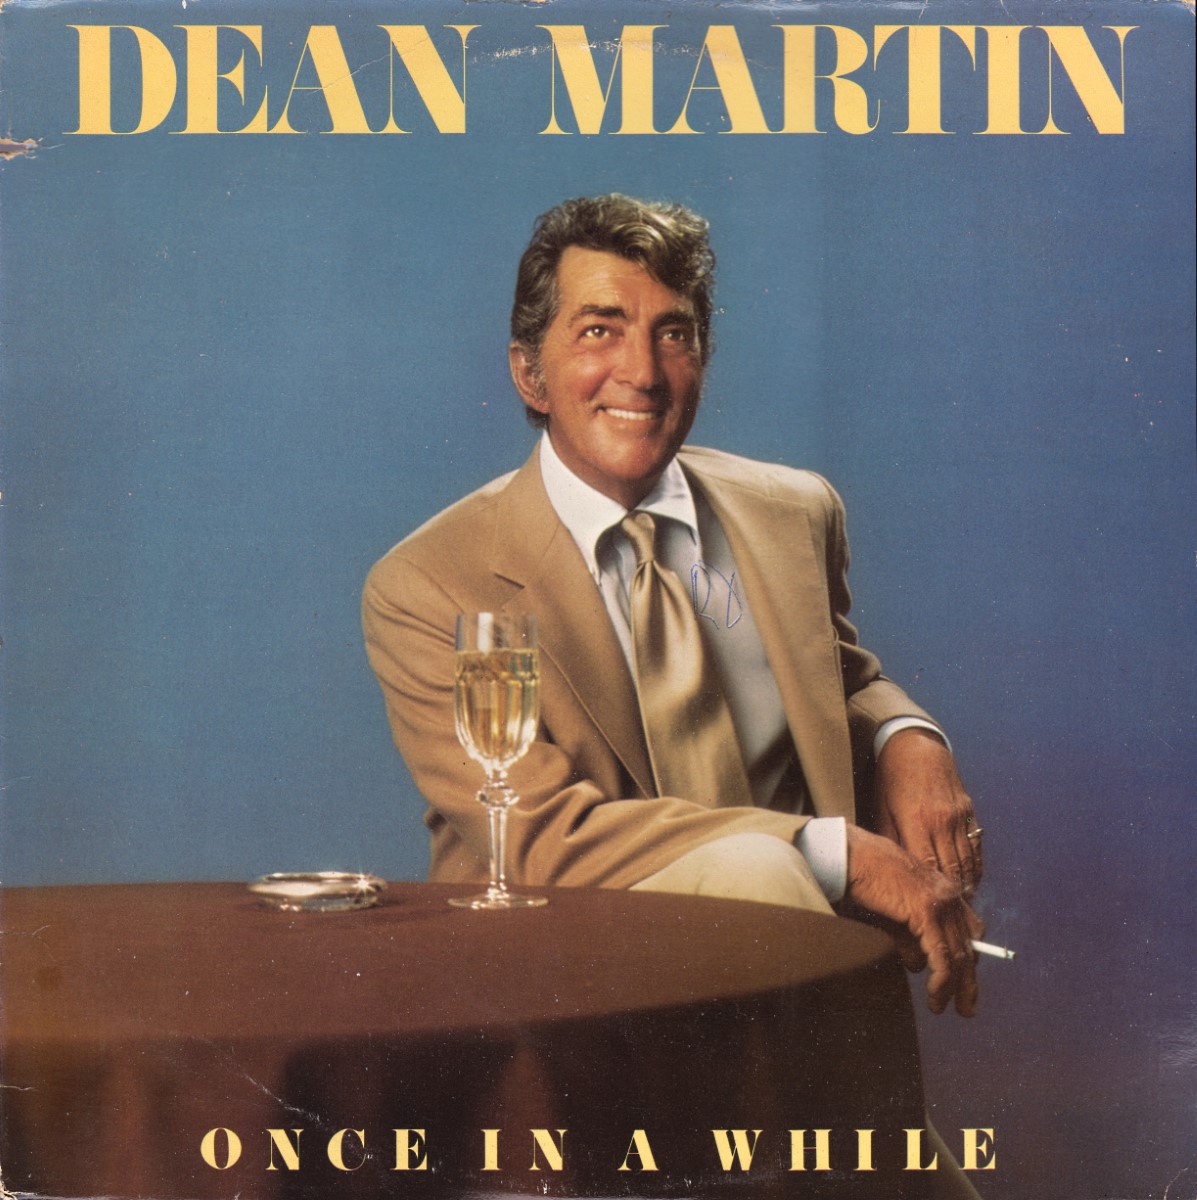 Dean Martin - Once In A While (1978)